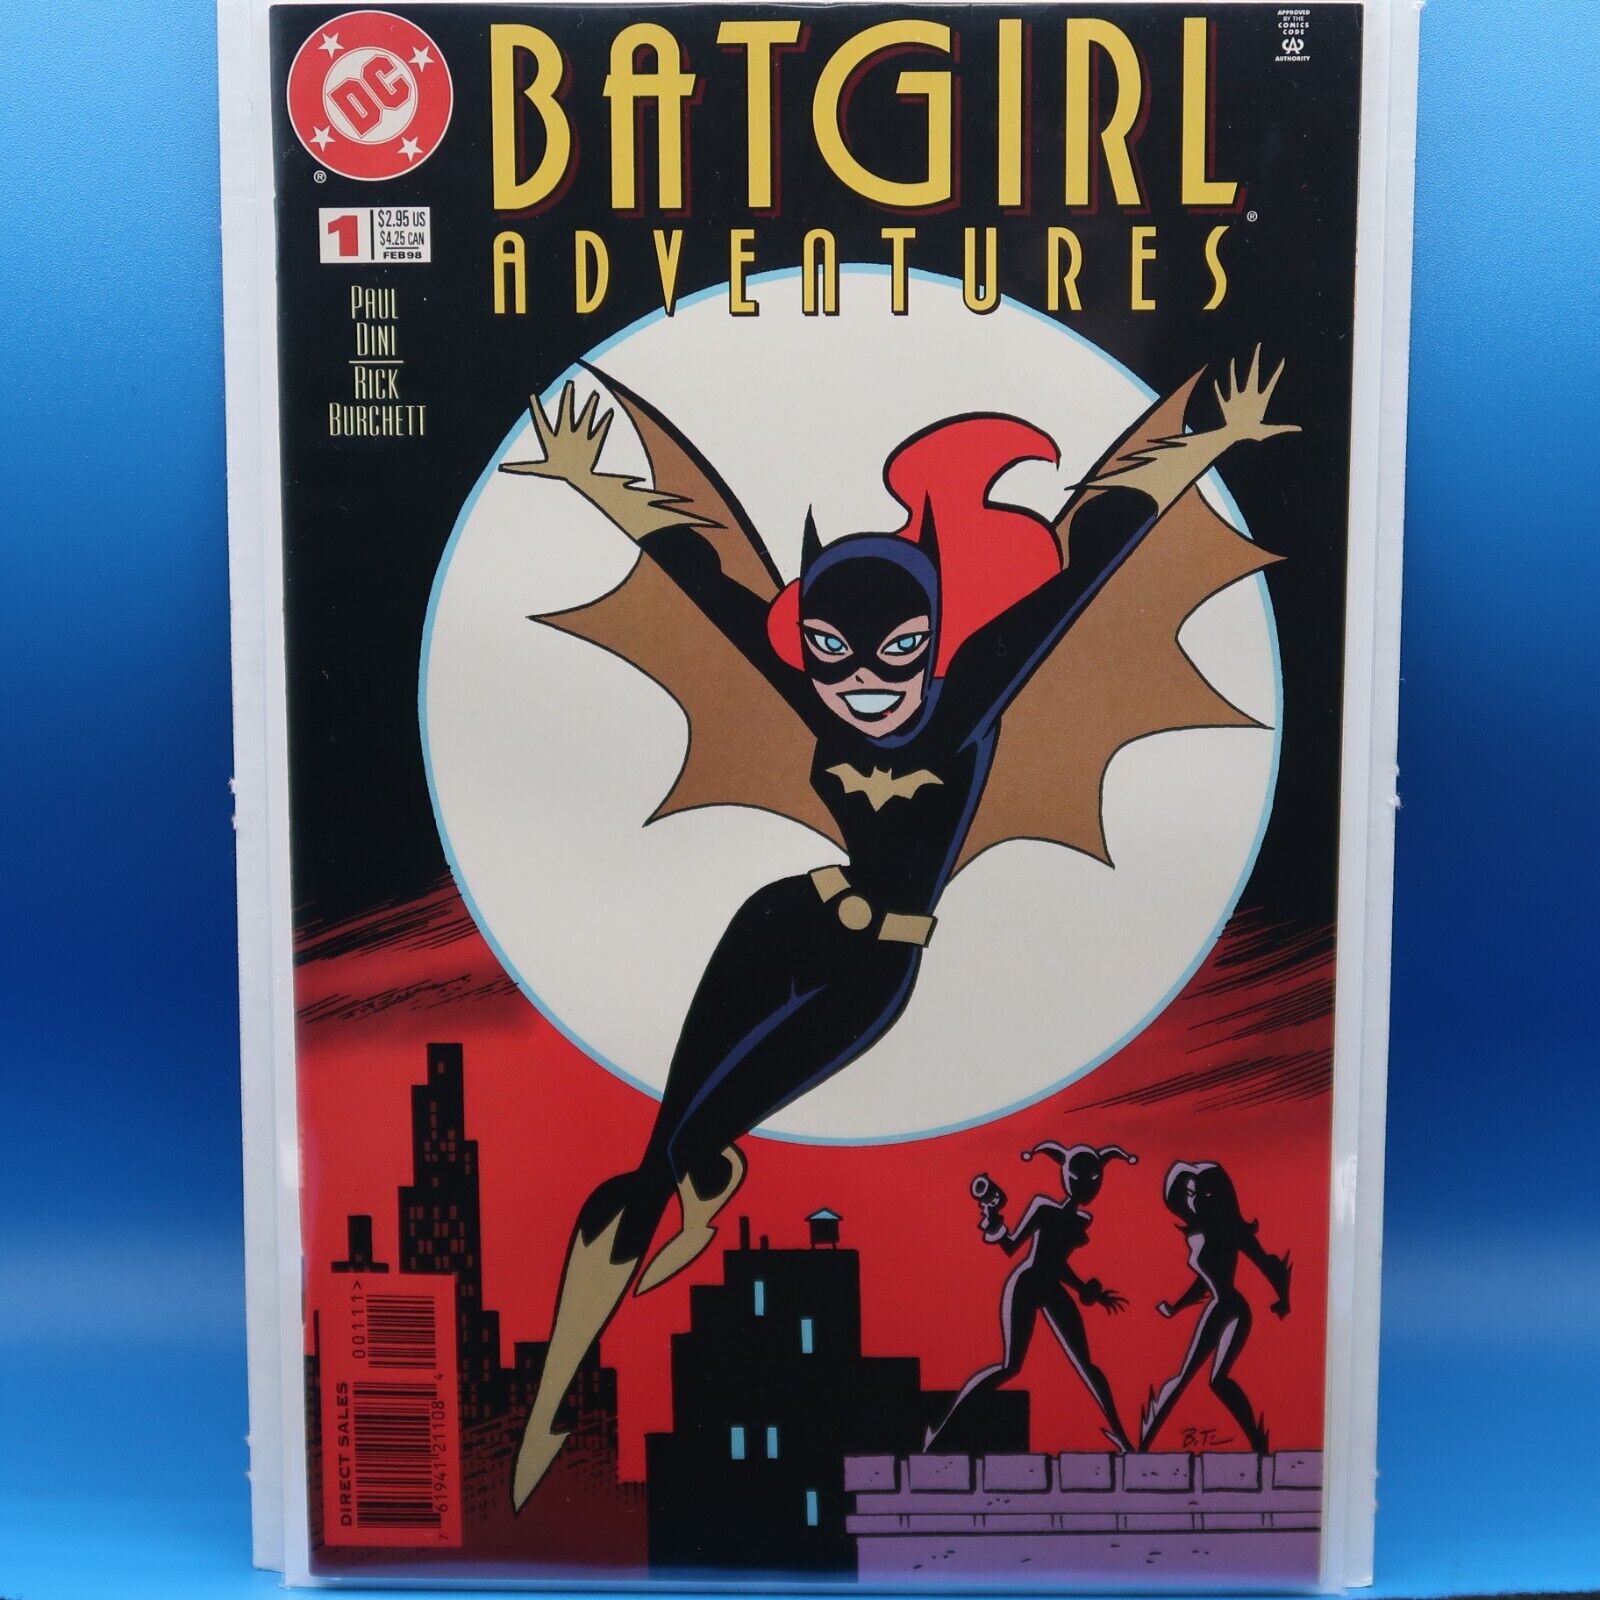 Batgirl Adventures #1 - Cover Art by Bruce Timm - One Shot Special Issue - NM/M